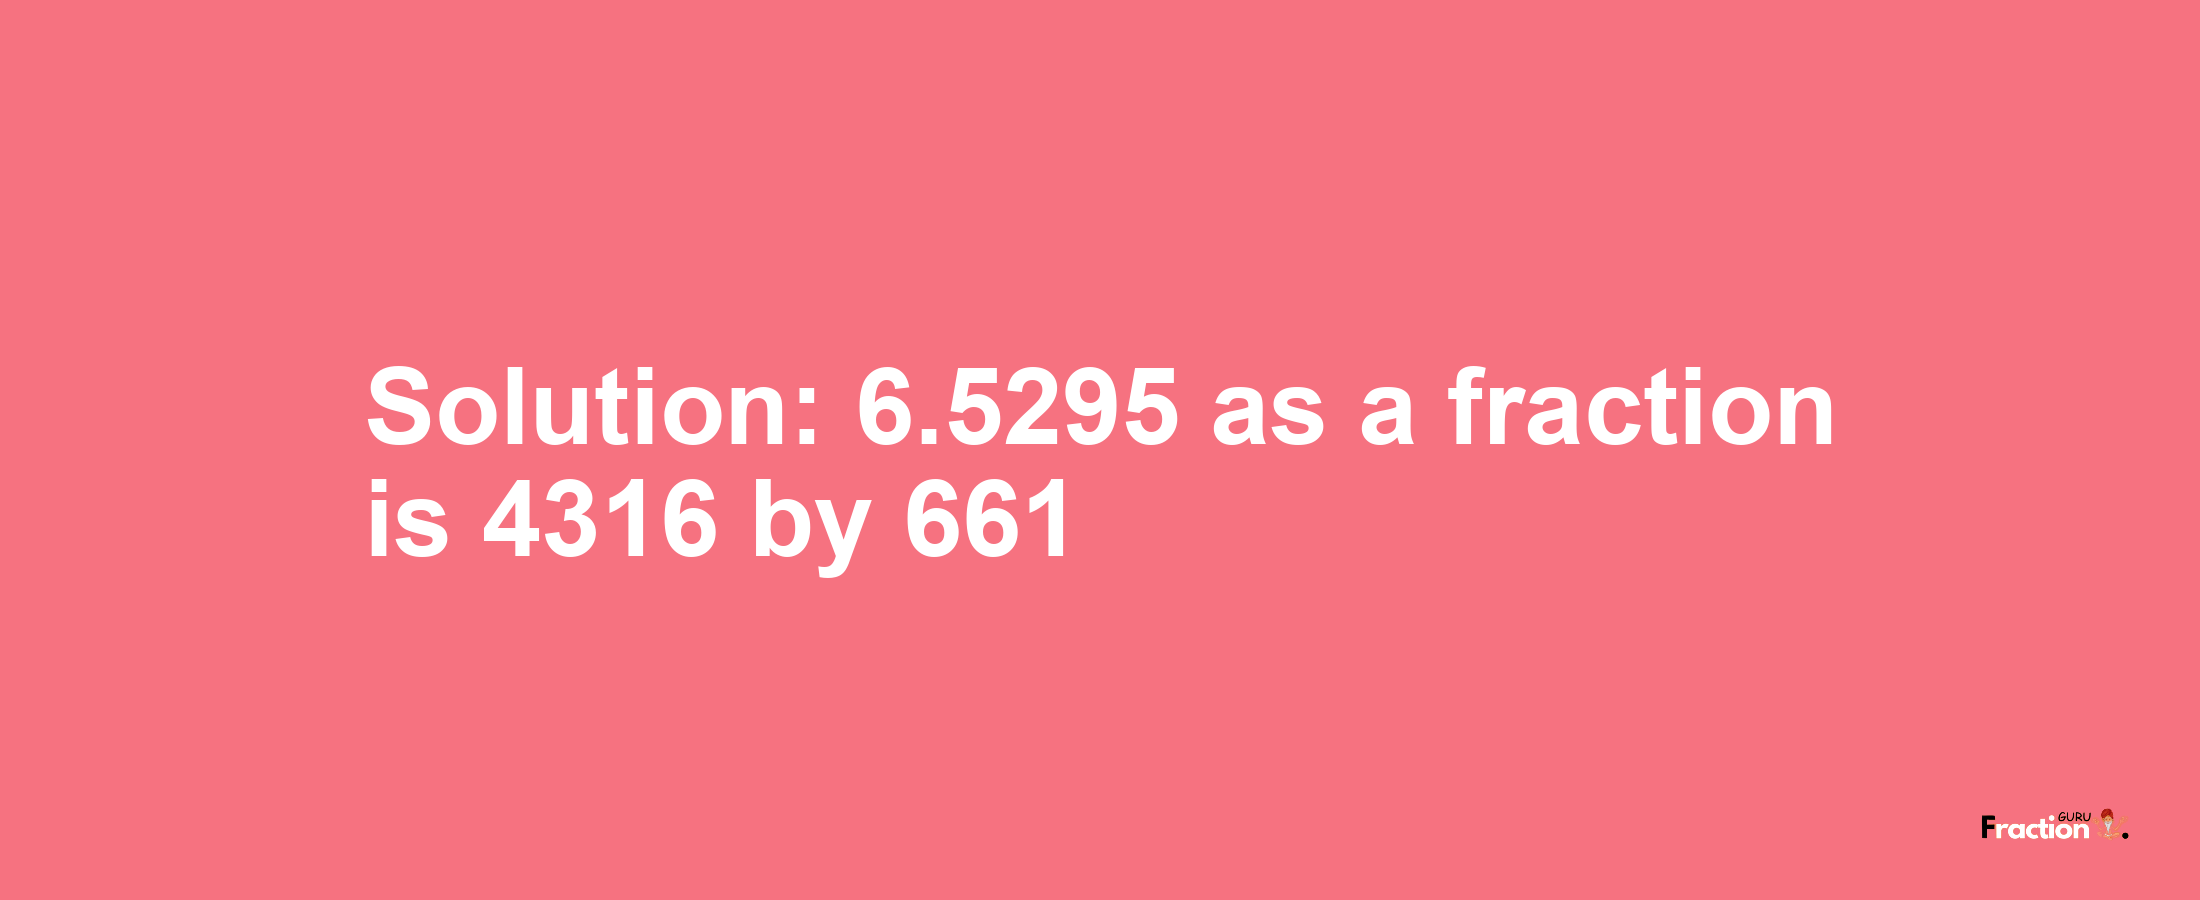 Solution:6.5295 as a fraction is 4316/661